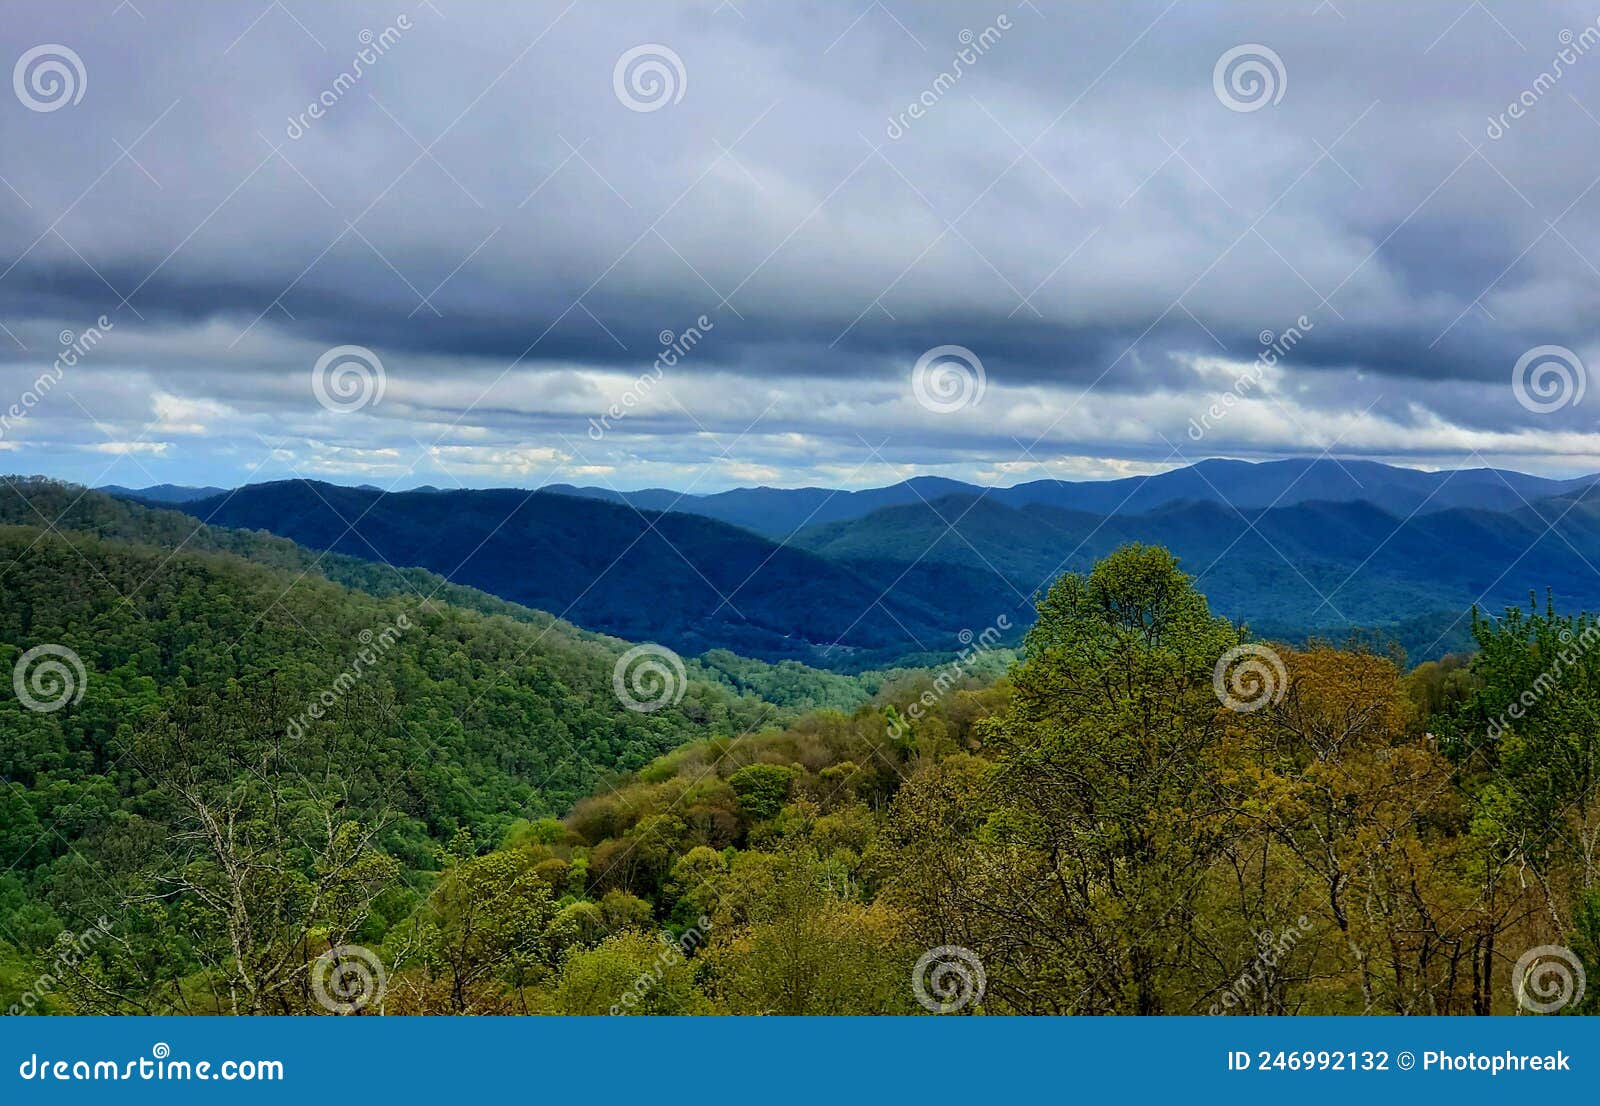 blue ridge mountians in spring in a cloudy day